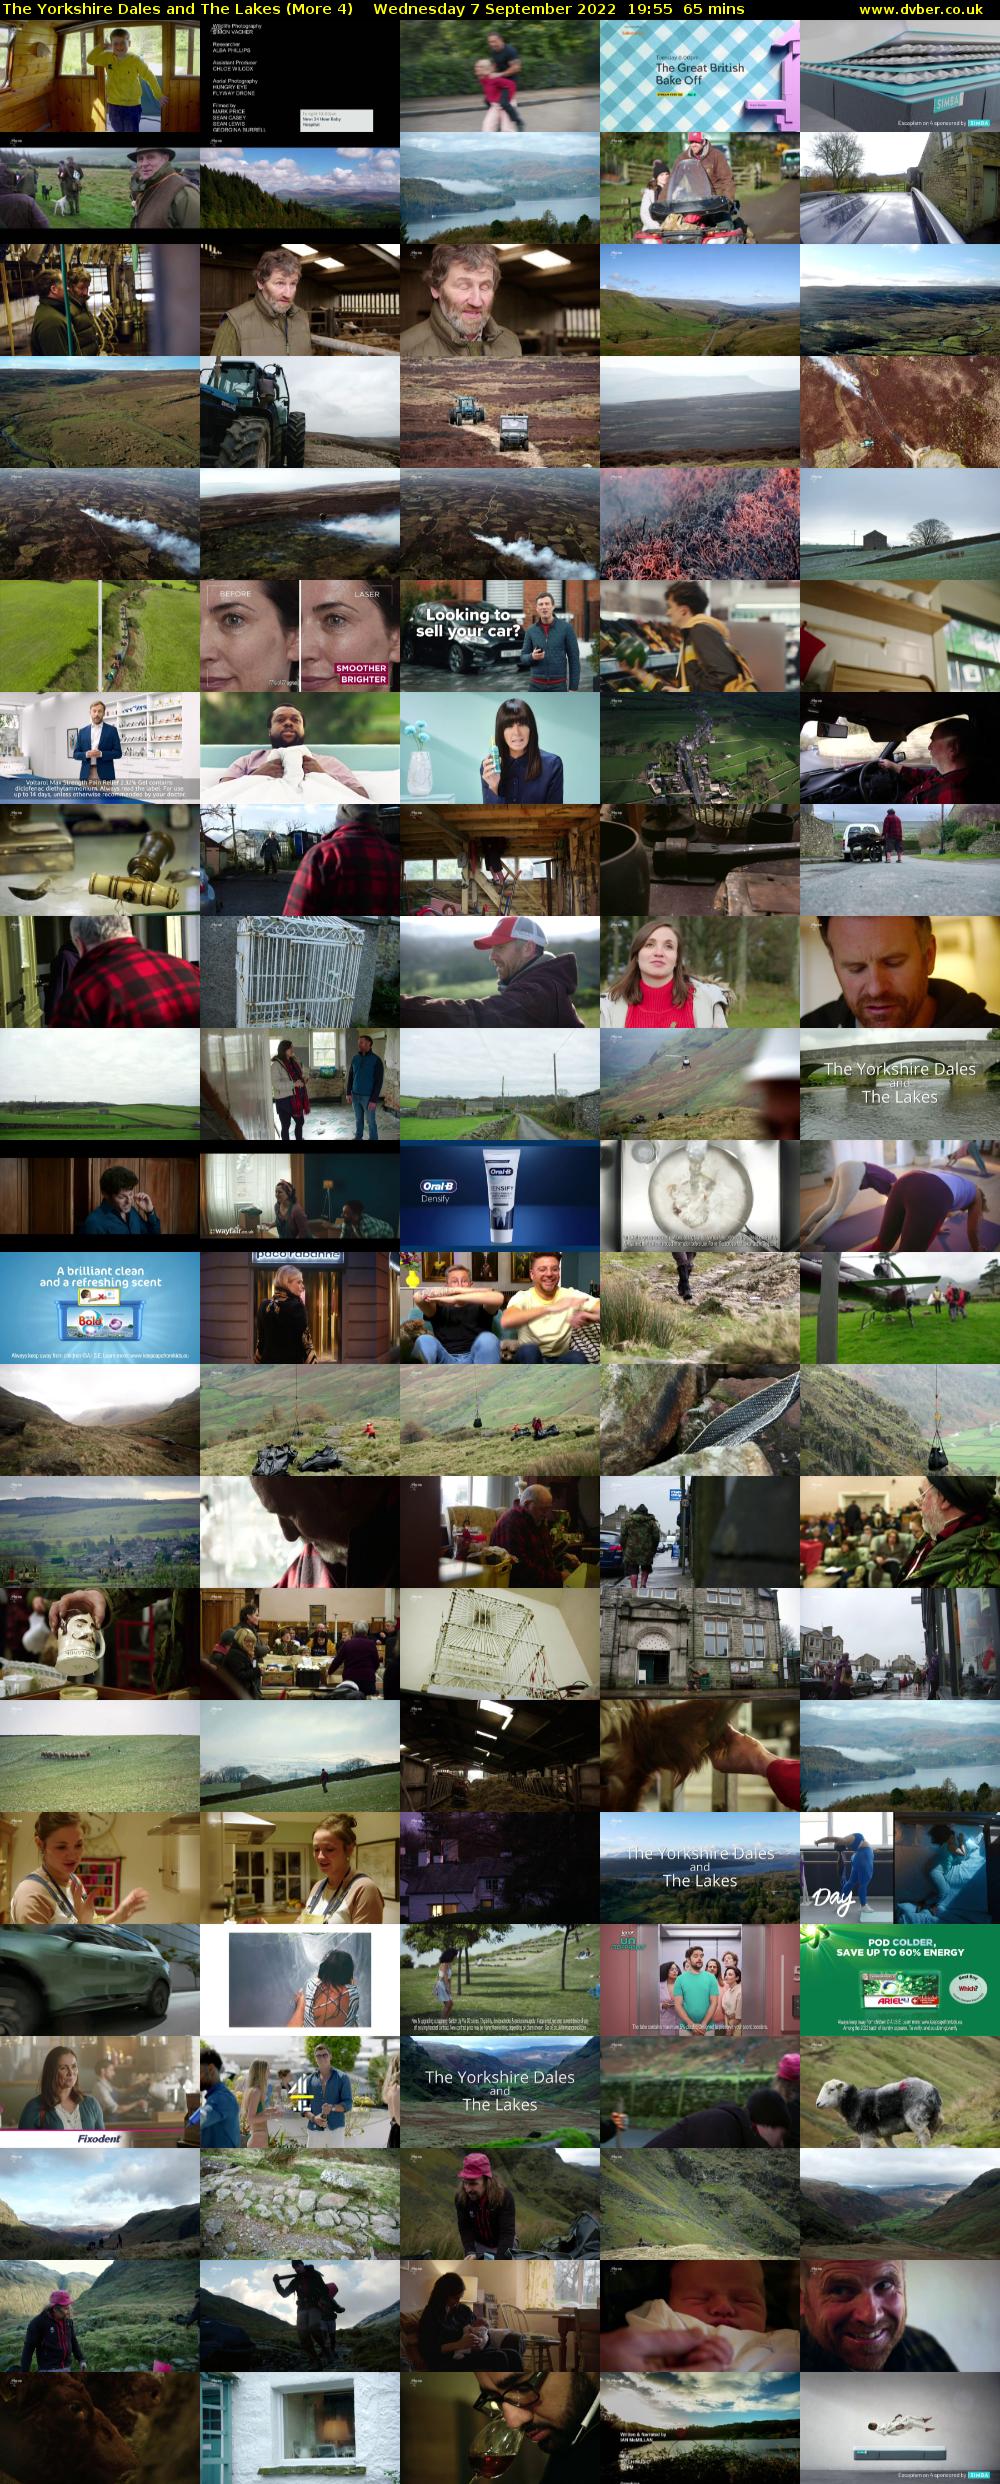 The Yorkshire Dales and The Lakes (More 4) Wednesday 7 September 2022 19:55 - 21:00